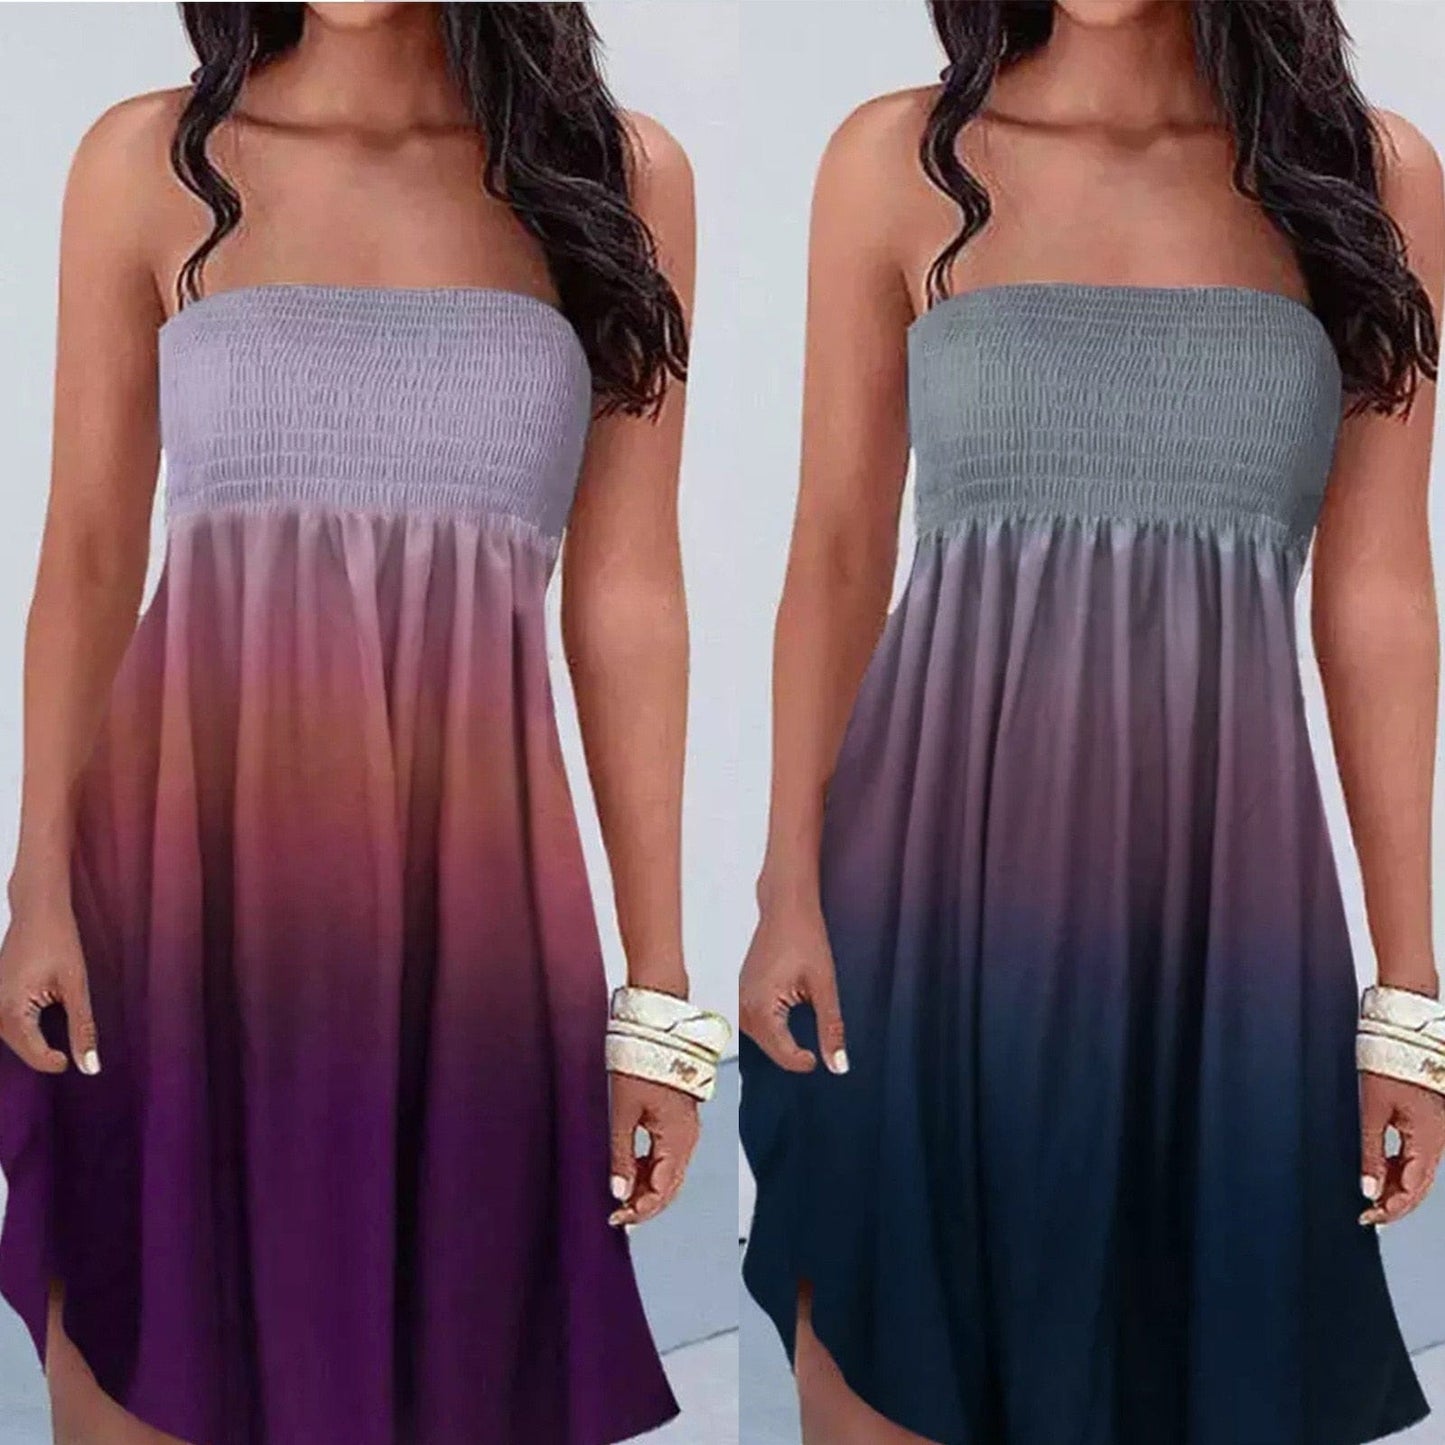 Strapless Summer Women Dress Positioning Geometric Print Elastic Band Neckline Chest Wrapping - Dresses